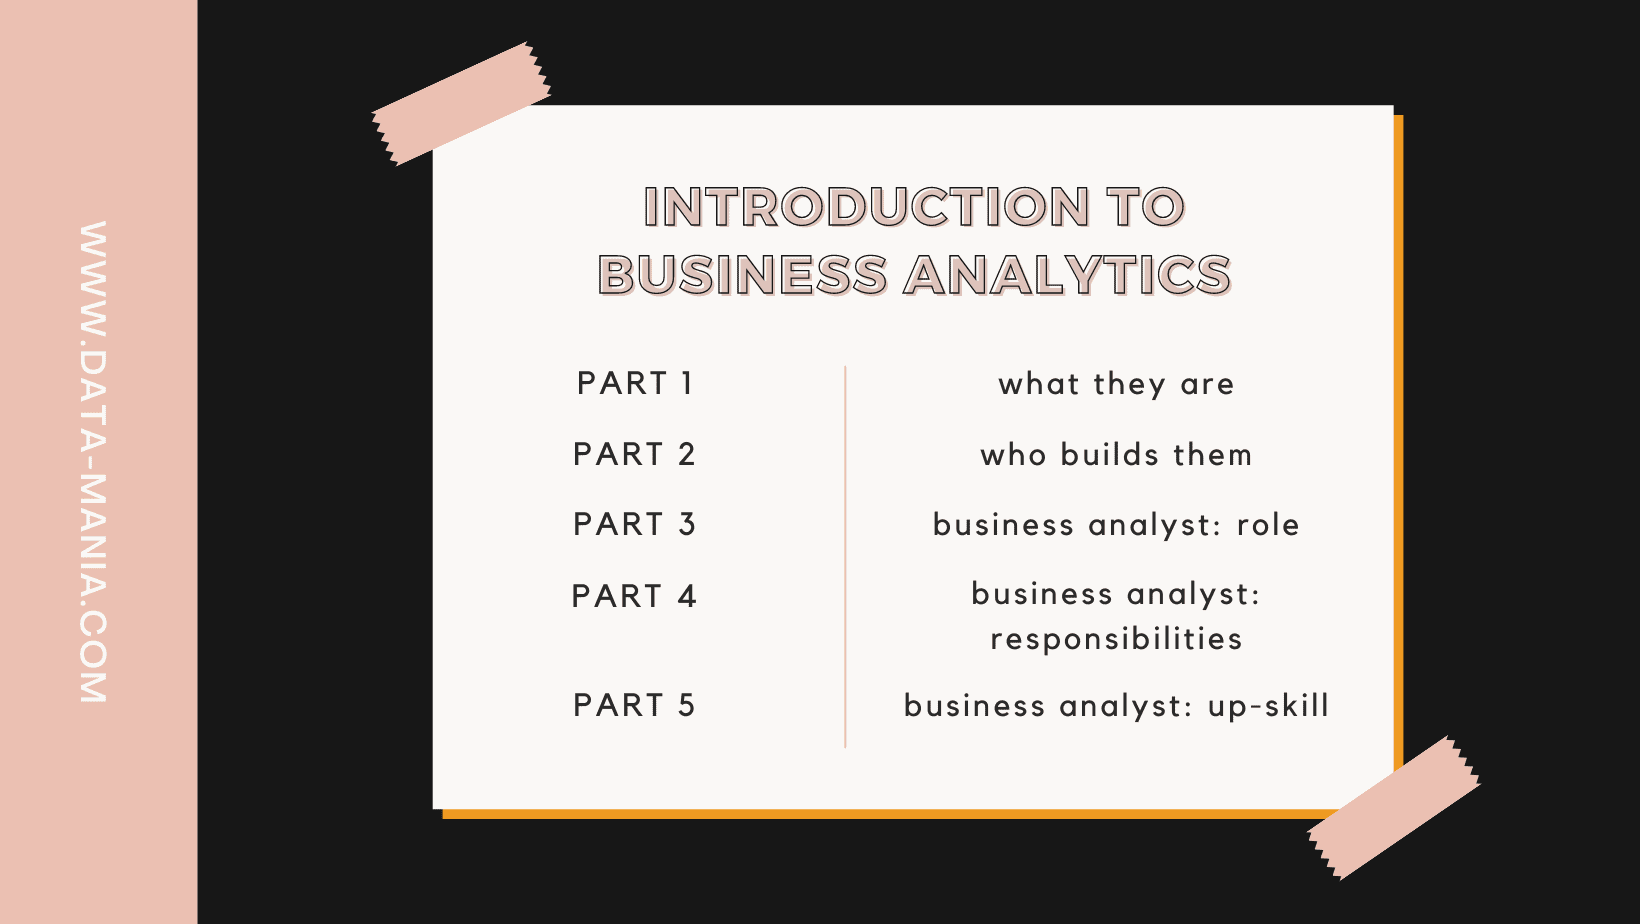 brief introduction to business analytics